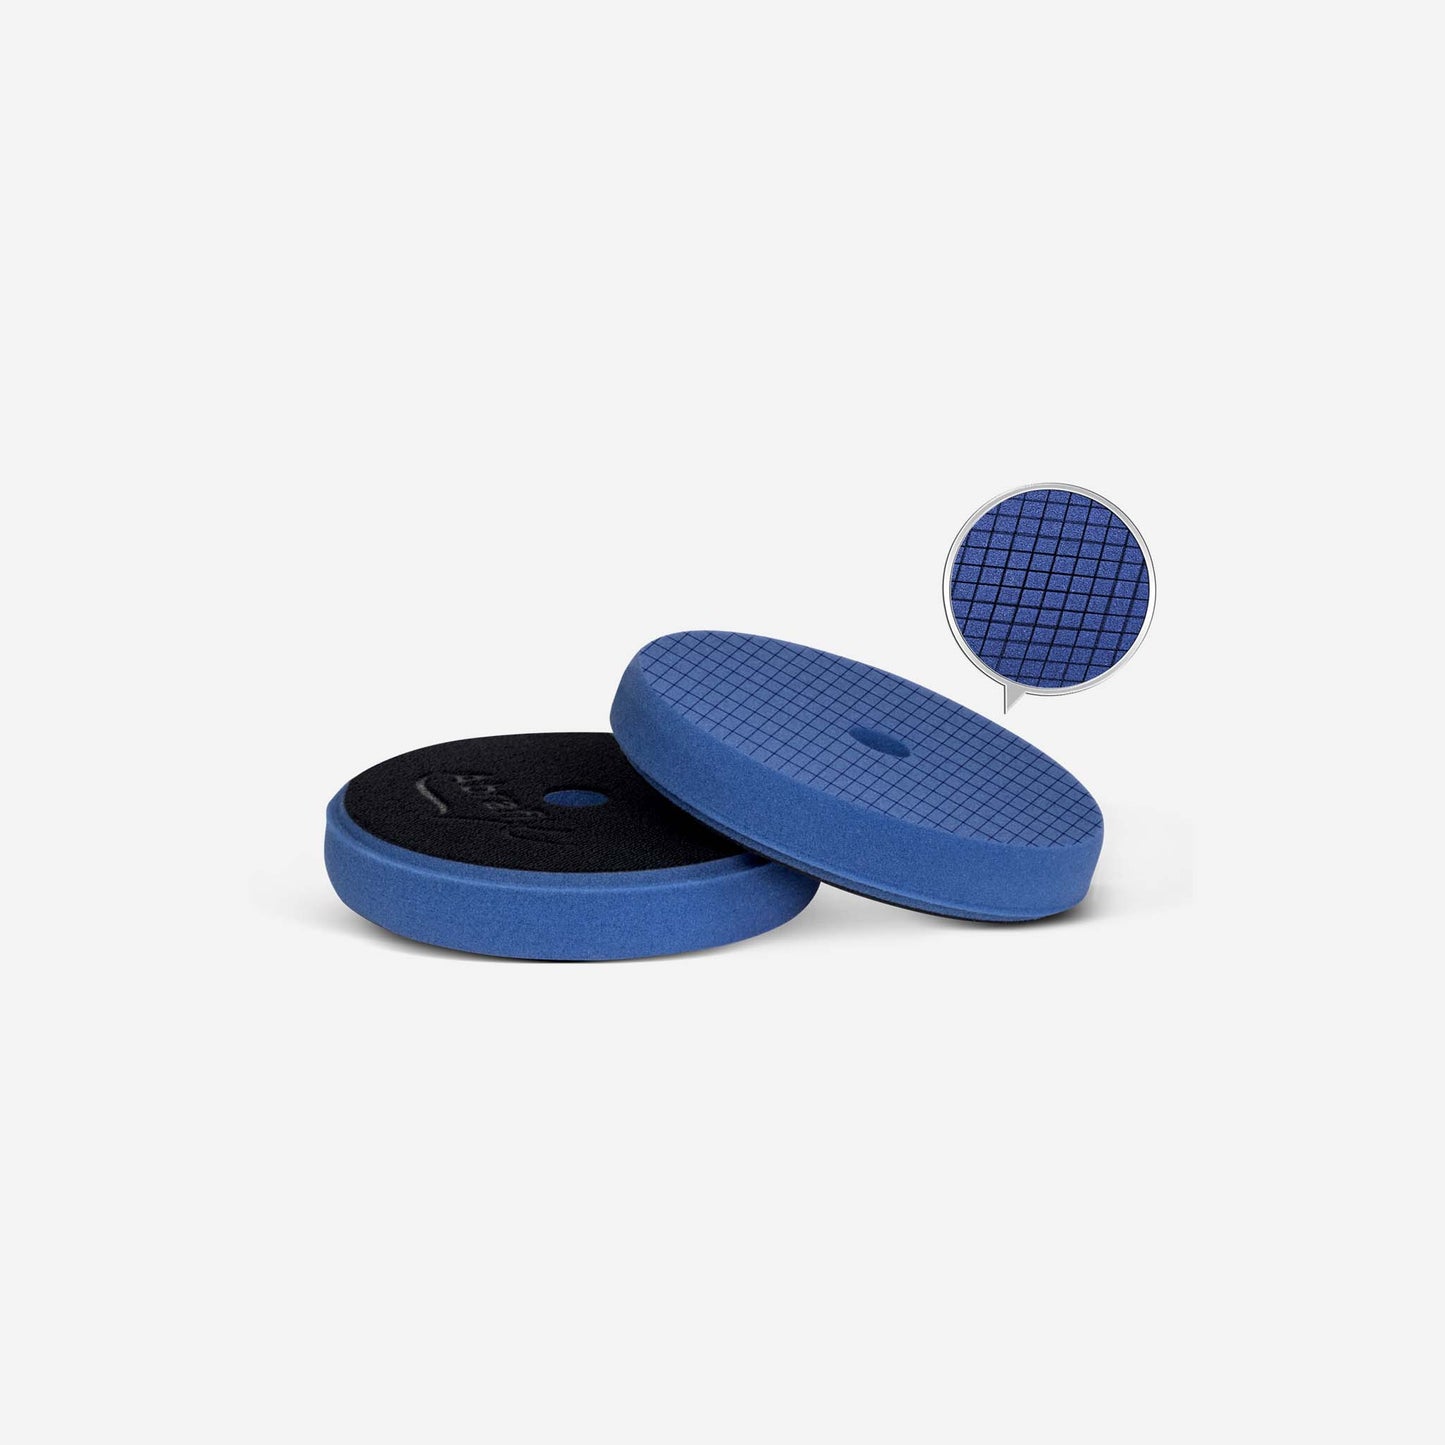 SpiderPad Navy Blue